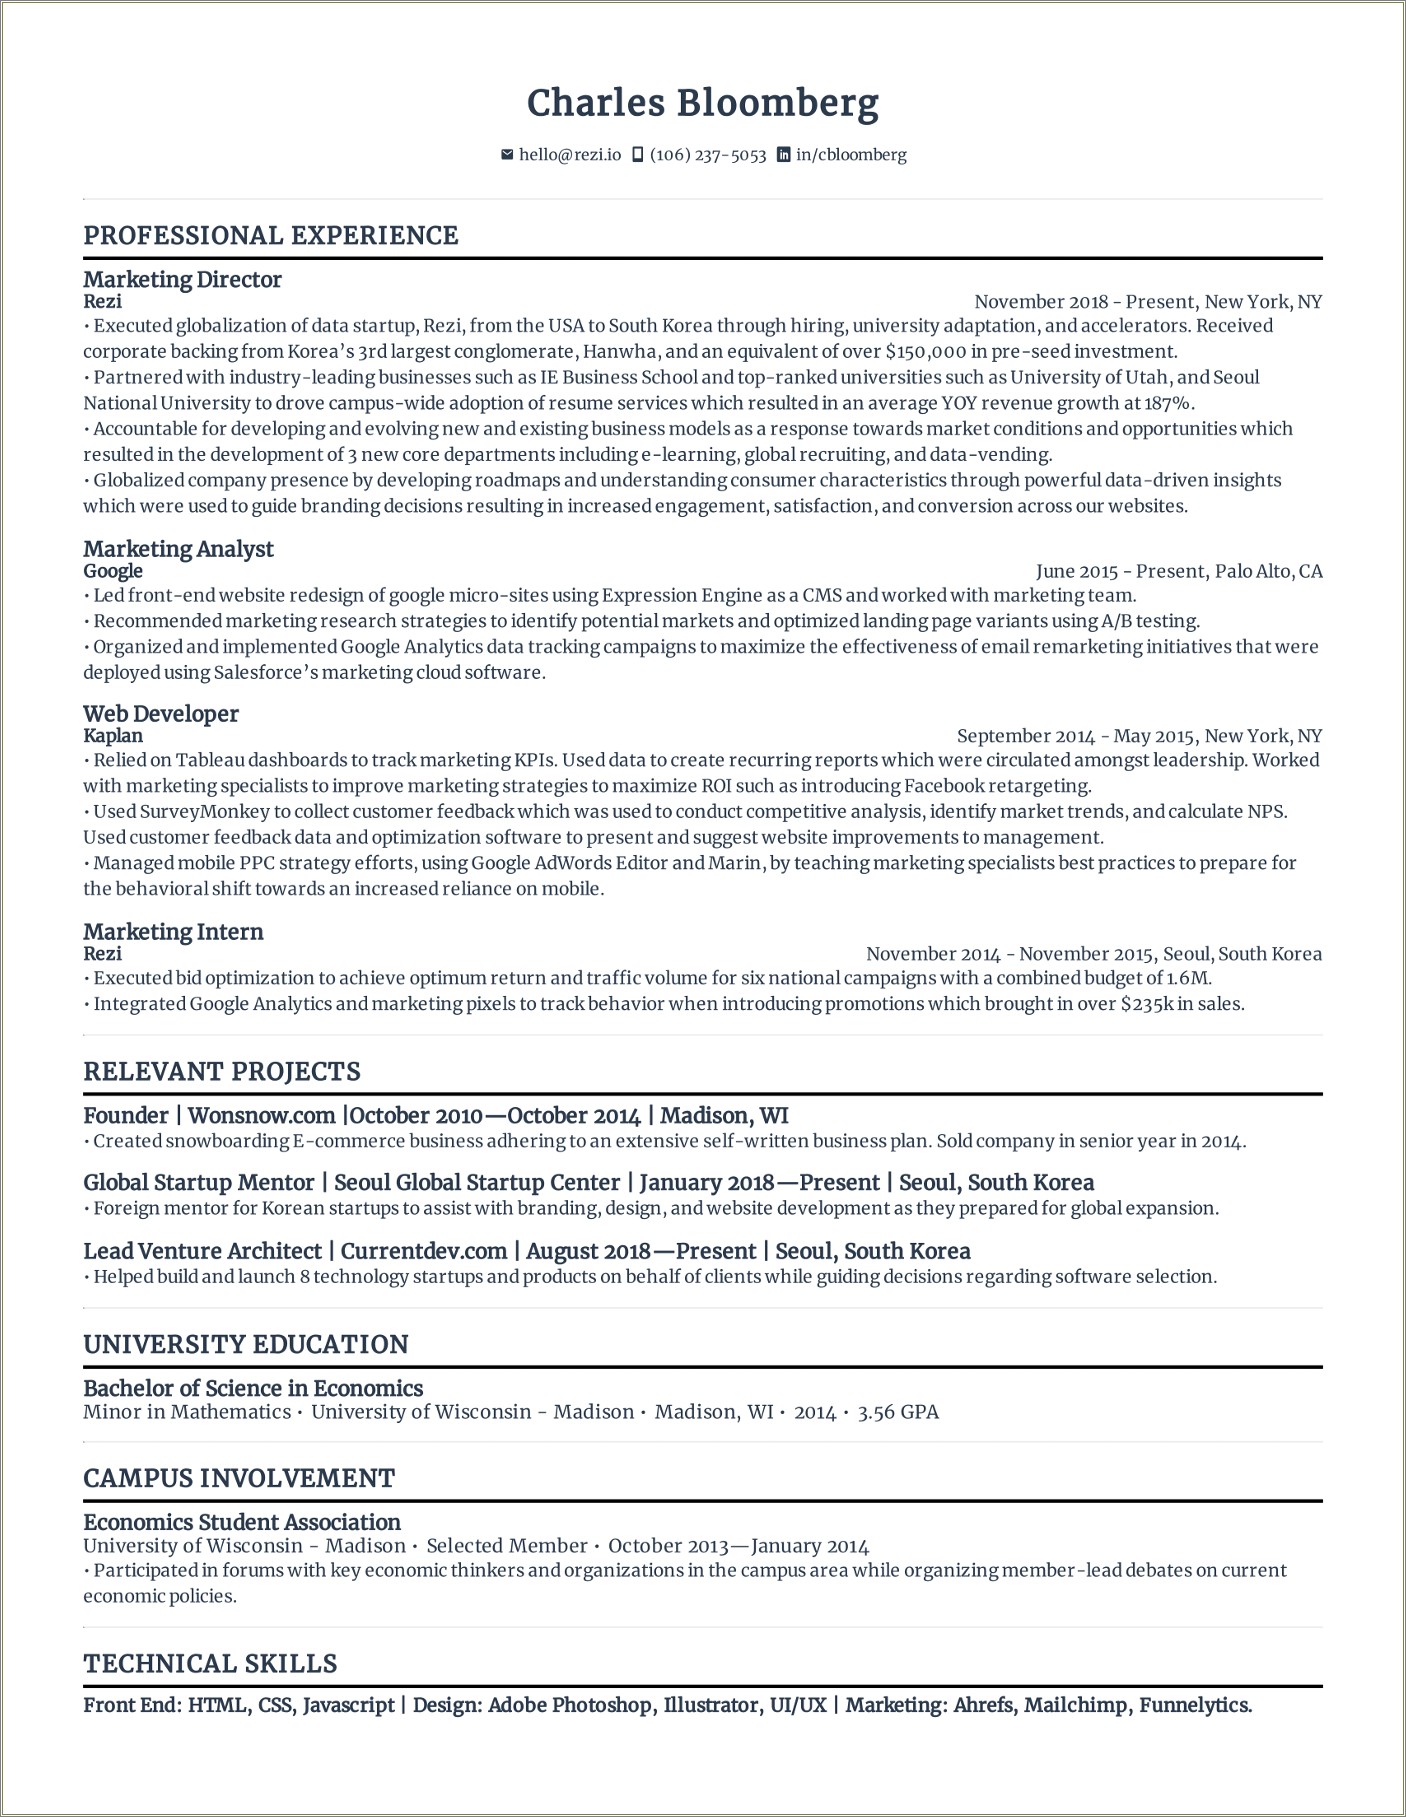 2018 Free Ats Friendly Resume Template